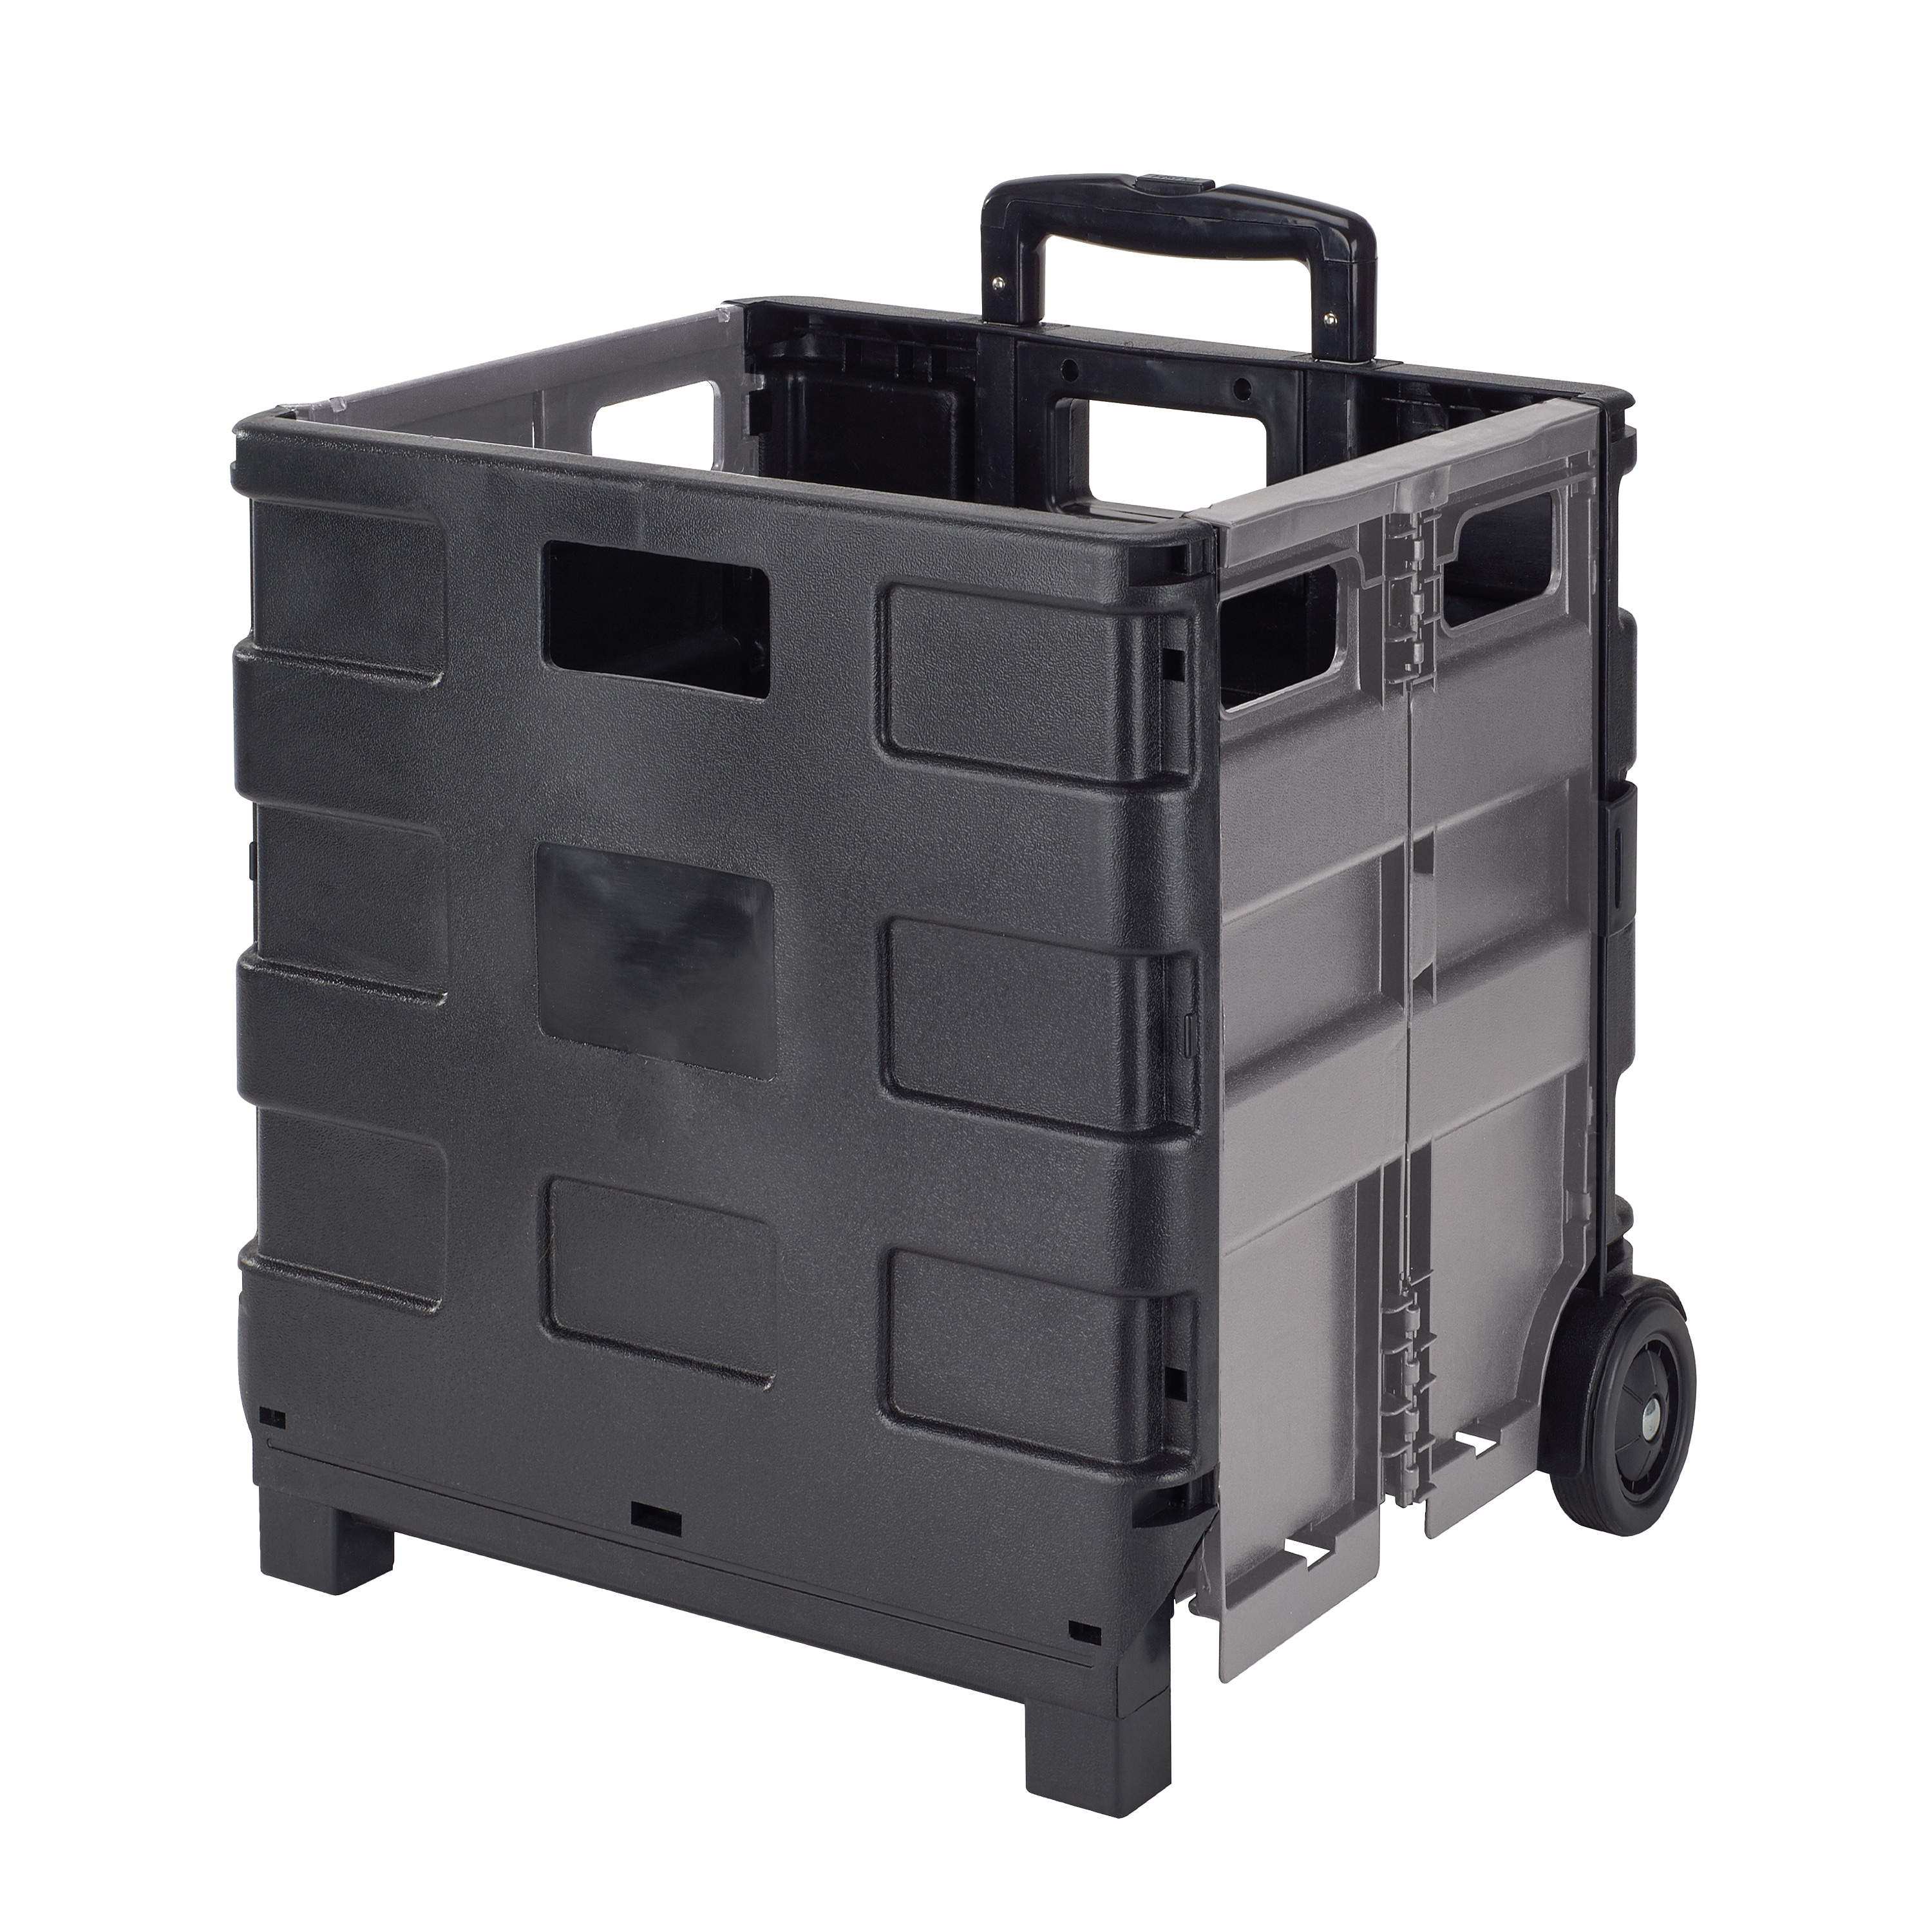 https://ak1.ostkcdn.com/images/products/is/images/direct/7f7d3340a61bc60d8d8b7aa8e71fc4f5ae315566/Simplify-Tote-%26-Go-Collapsible-Utility-Cart.jpg